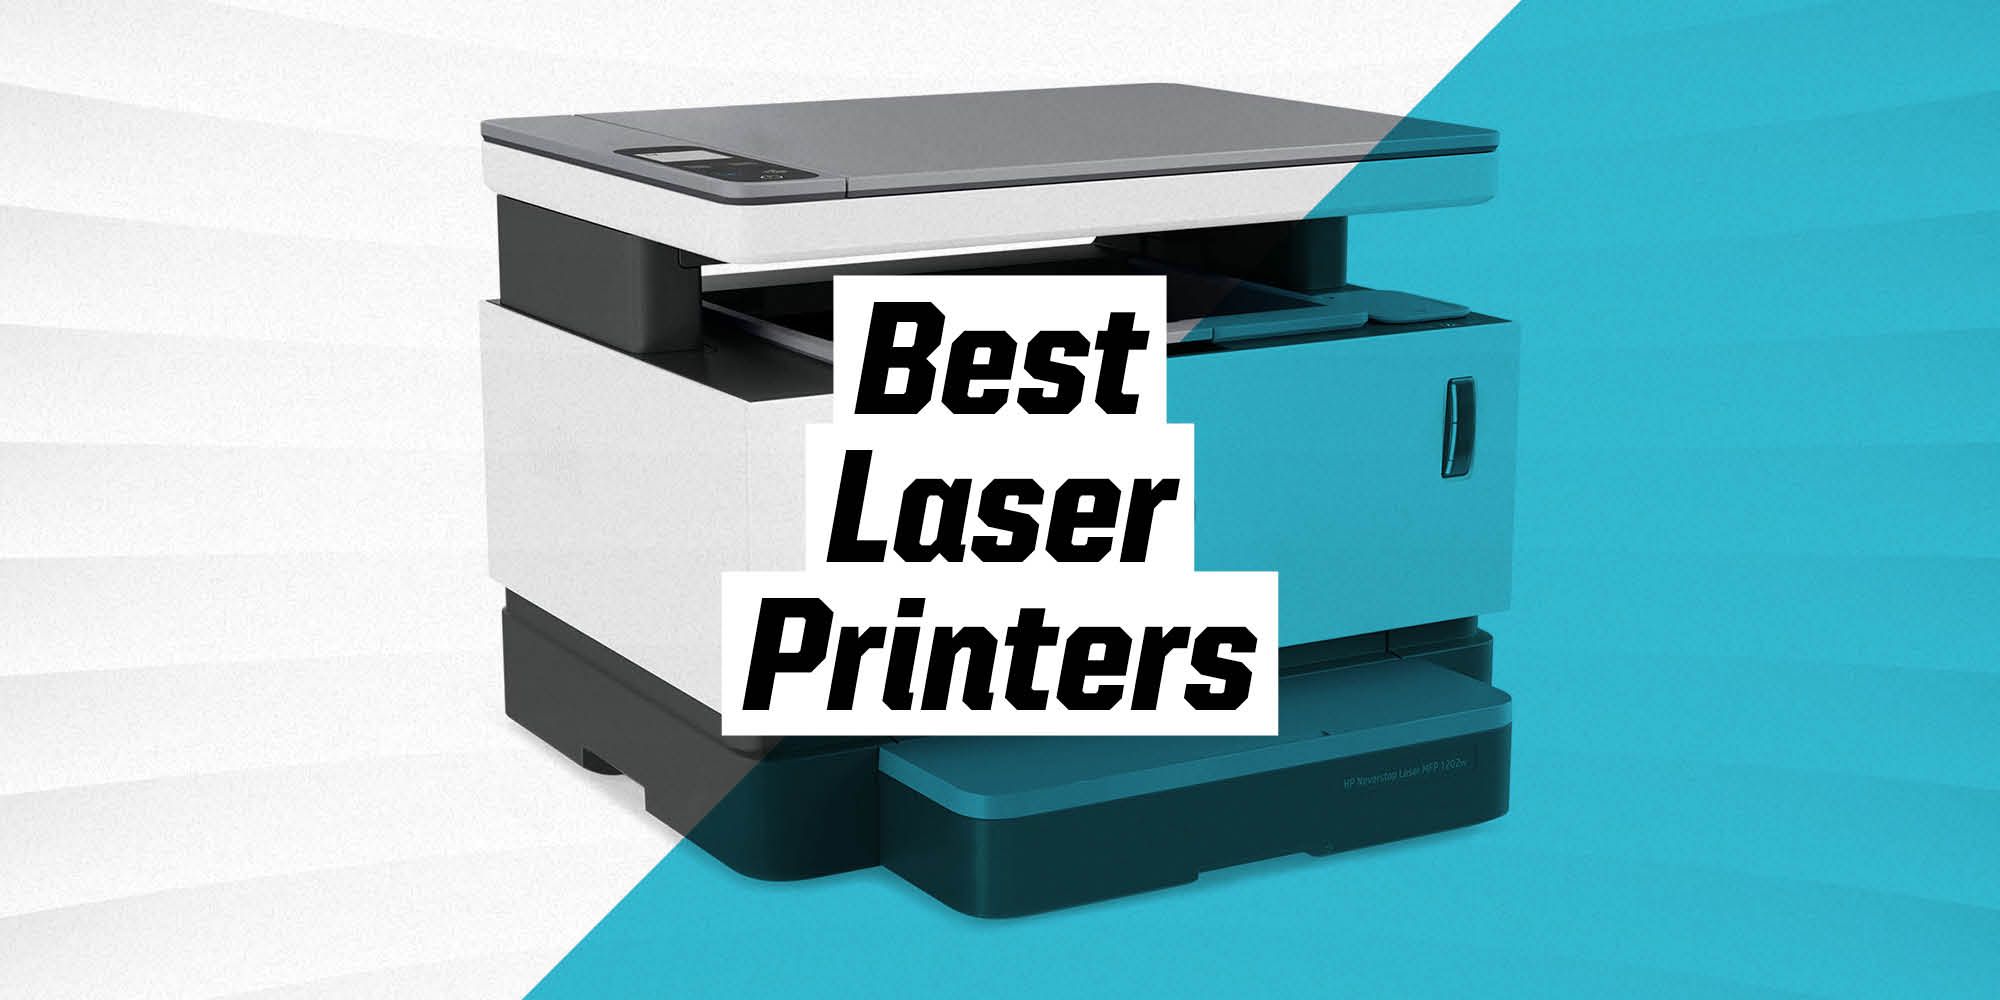 top 5 laser printers for home use